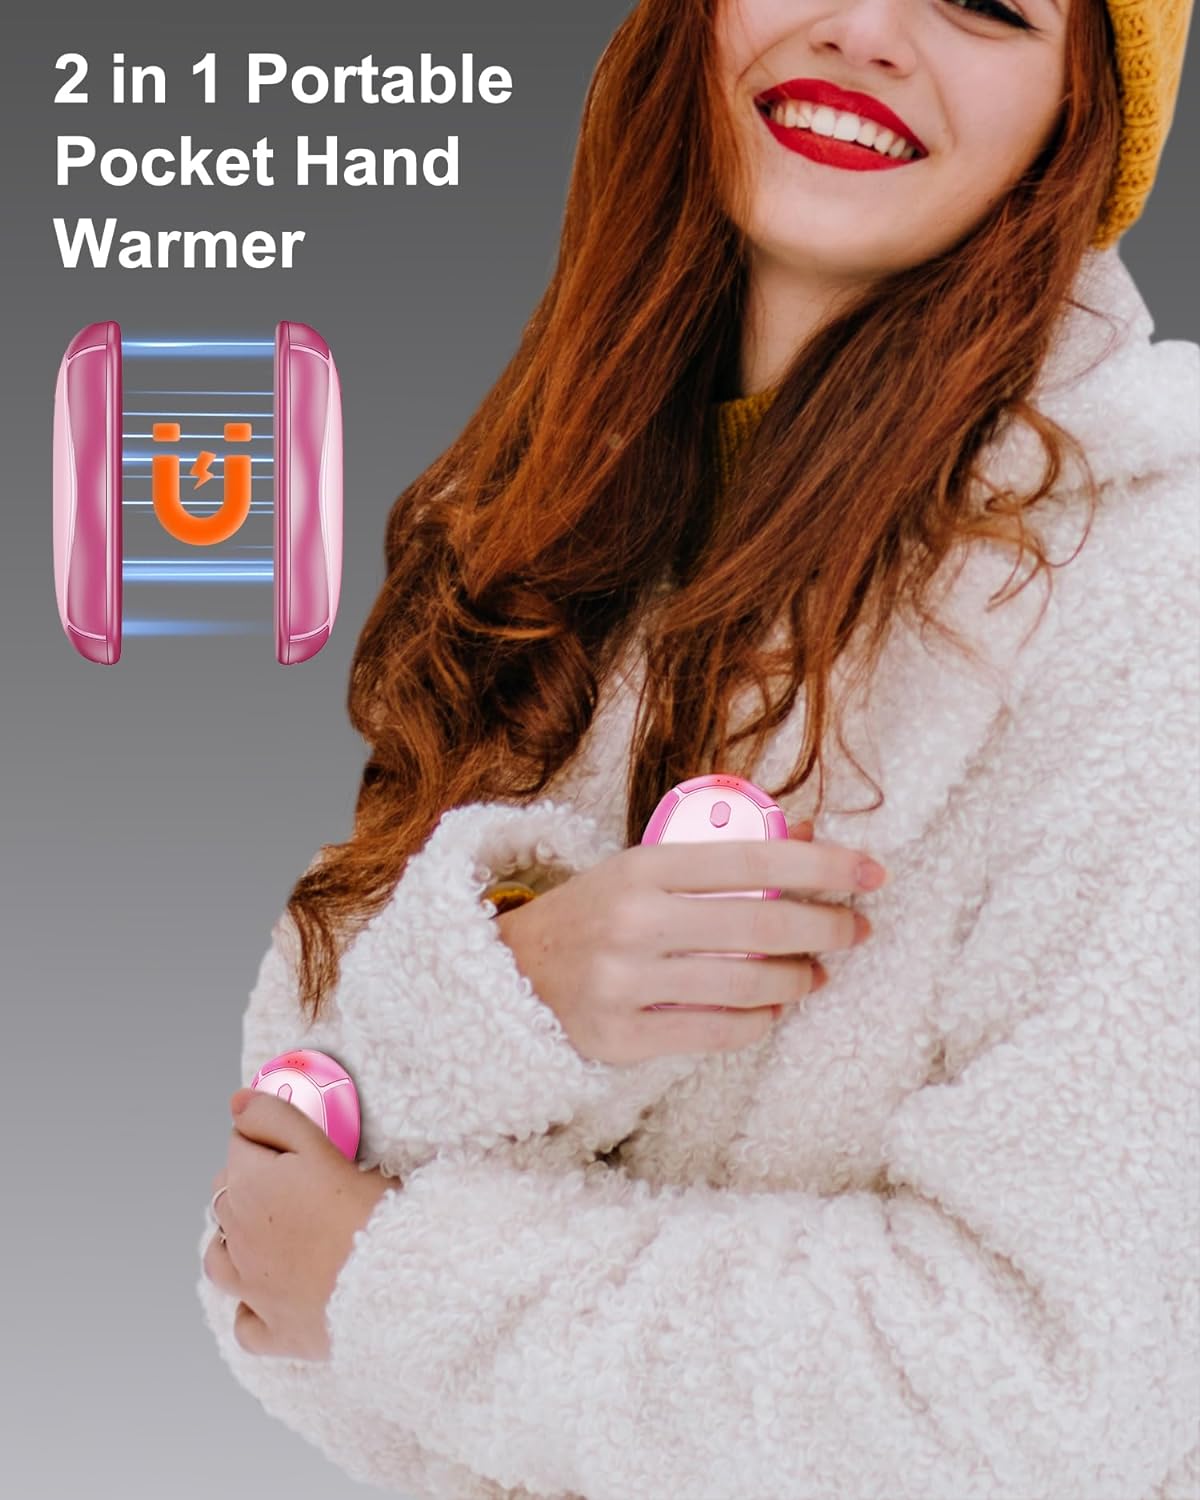 Shirble Hand Warmers Rechargeable 2 Pack - 15Hrs Long Heating Rechargeable Hand Warmer, Reusable Handwarmers, Portable Pocket Electric Hand Warmer Use As Winter Warm Christmas Birthday Gift, Rose Red